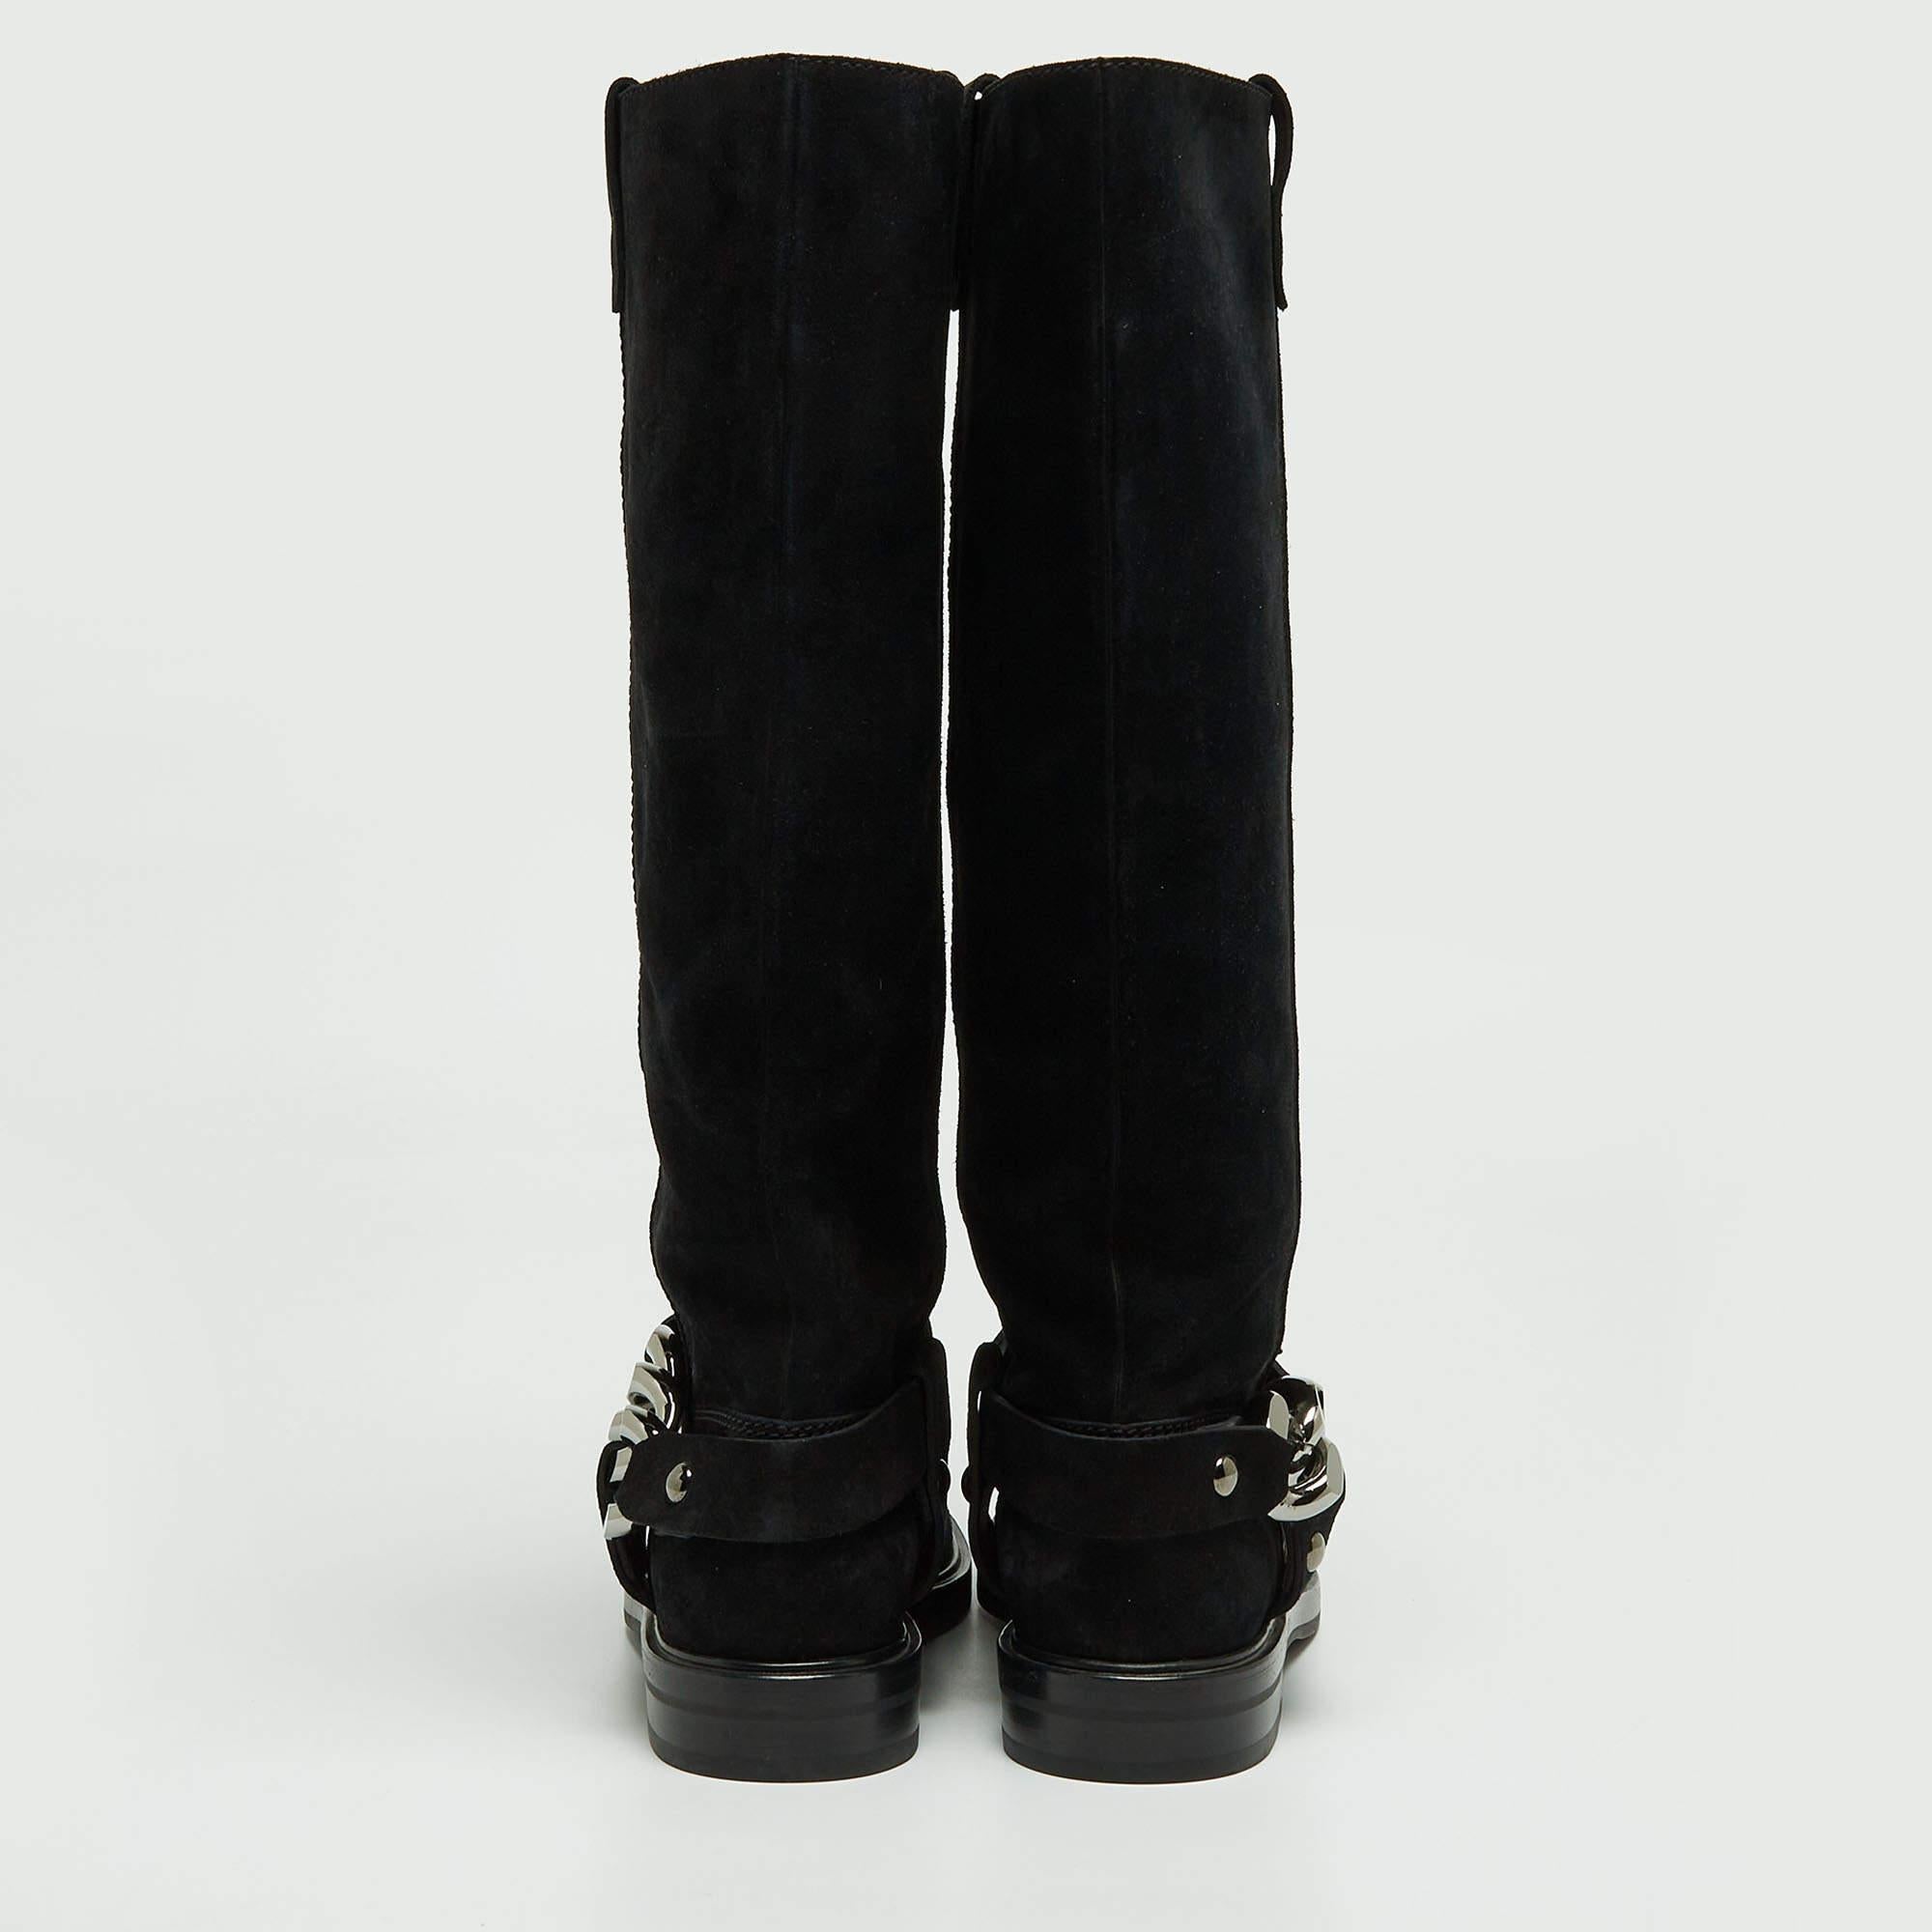 Casadei Black Suede Knee Length Boots Size 38.5 For Sale 3